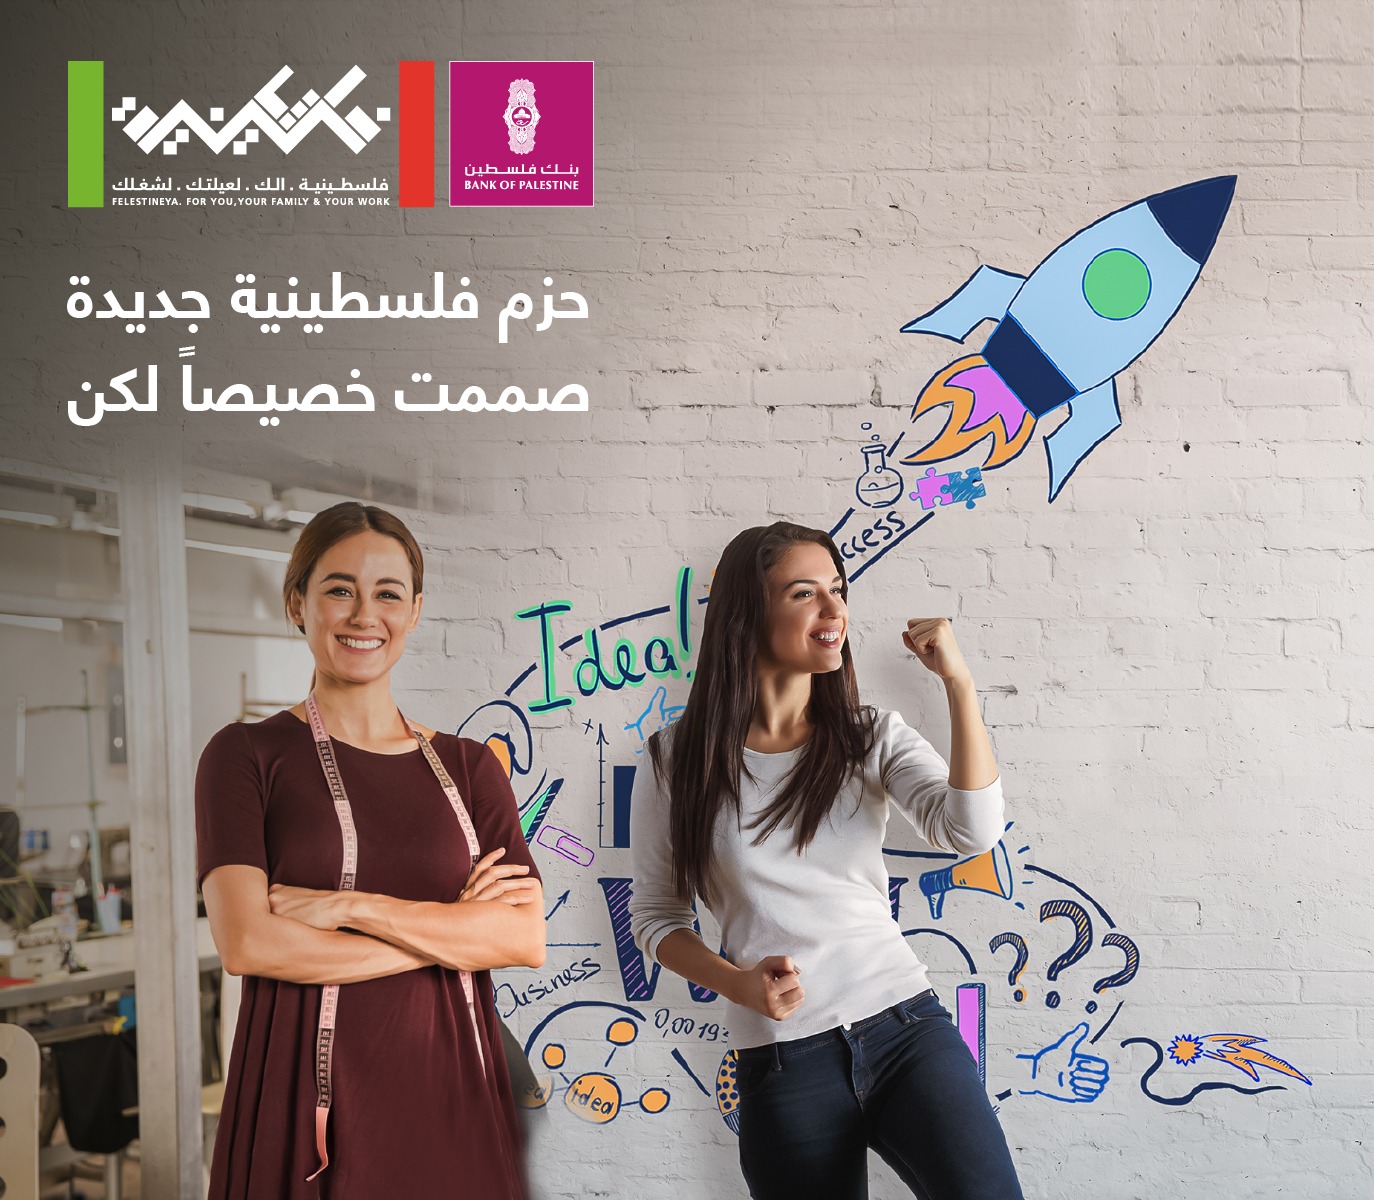 Under the Felestineya program, Bank of Palestine launches two suites for women and women entrepreneurs